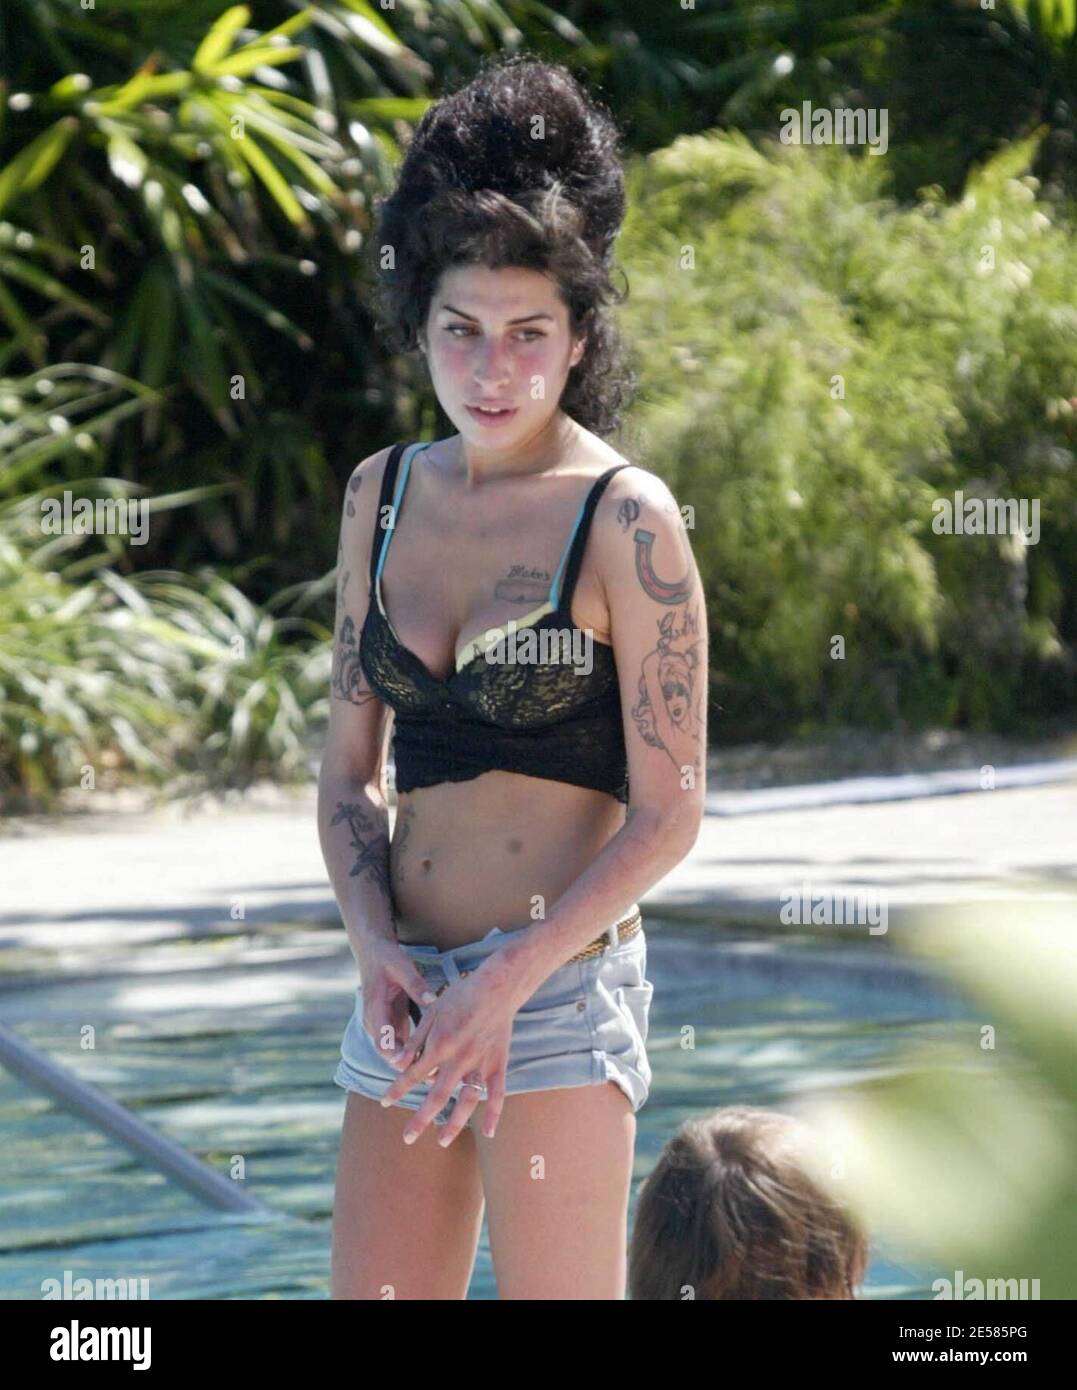 Rehab" singer Amy Winehouse displayed her tattoos and scars in a skimpy  pair of shorts and lacy top as she chilled out at a Miami Beach hotel pool  amid rumors that she